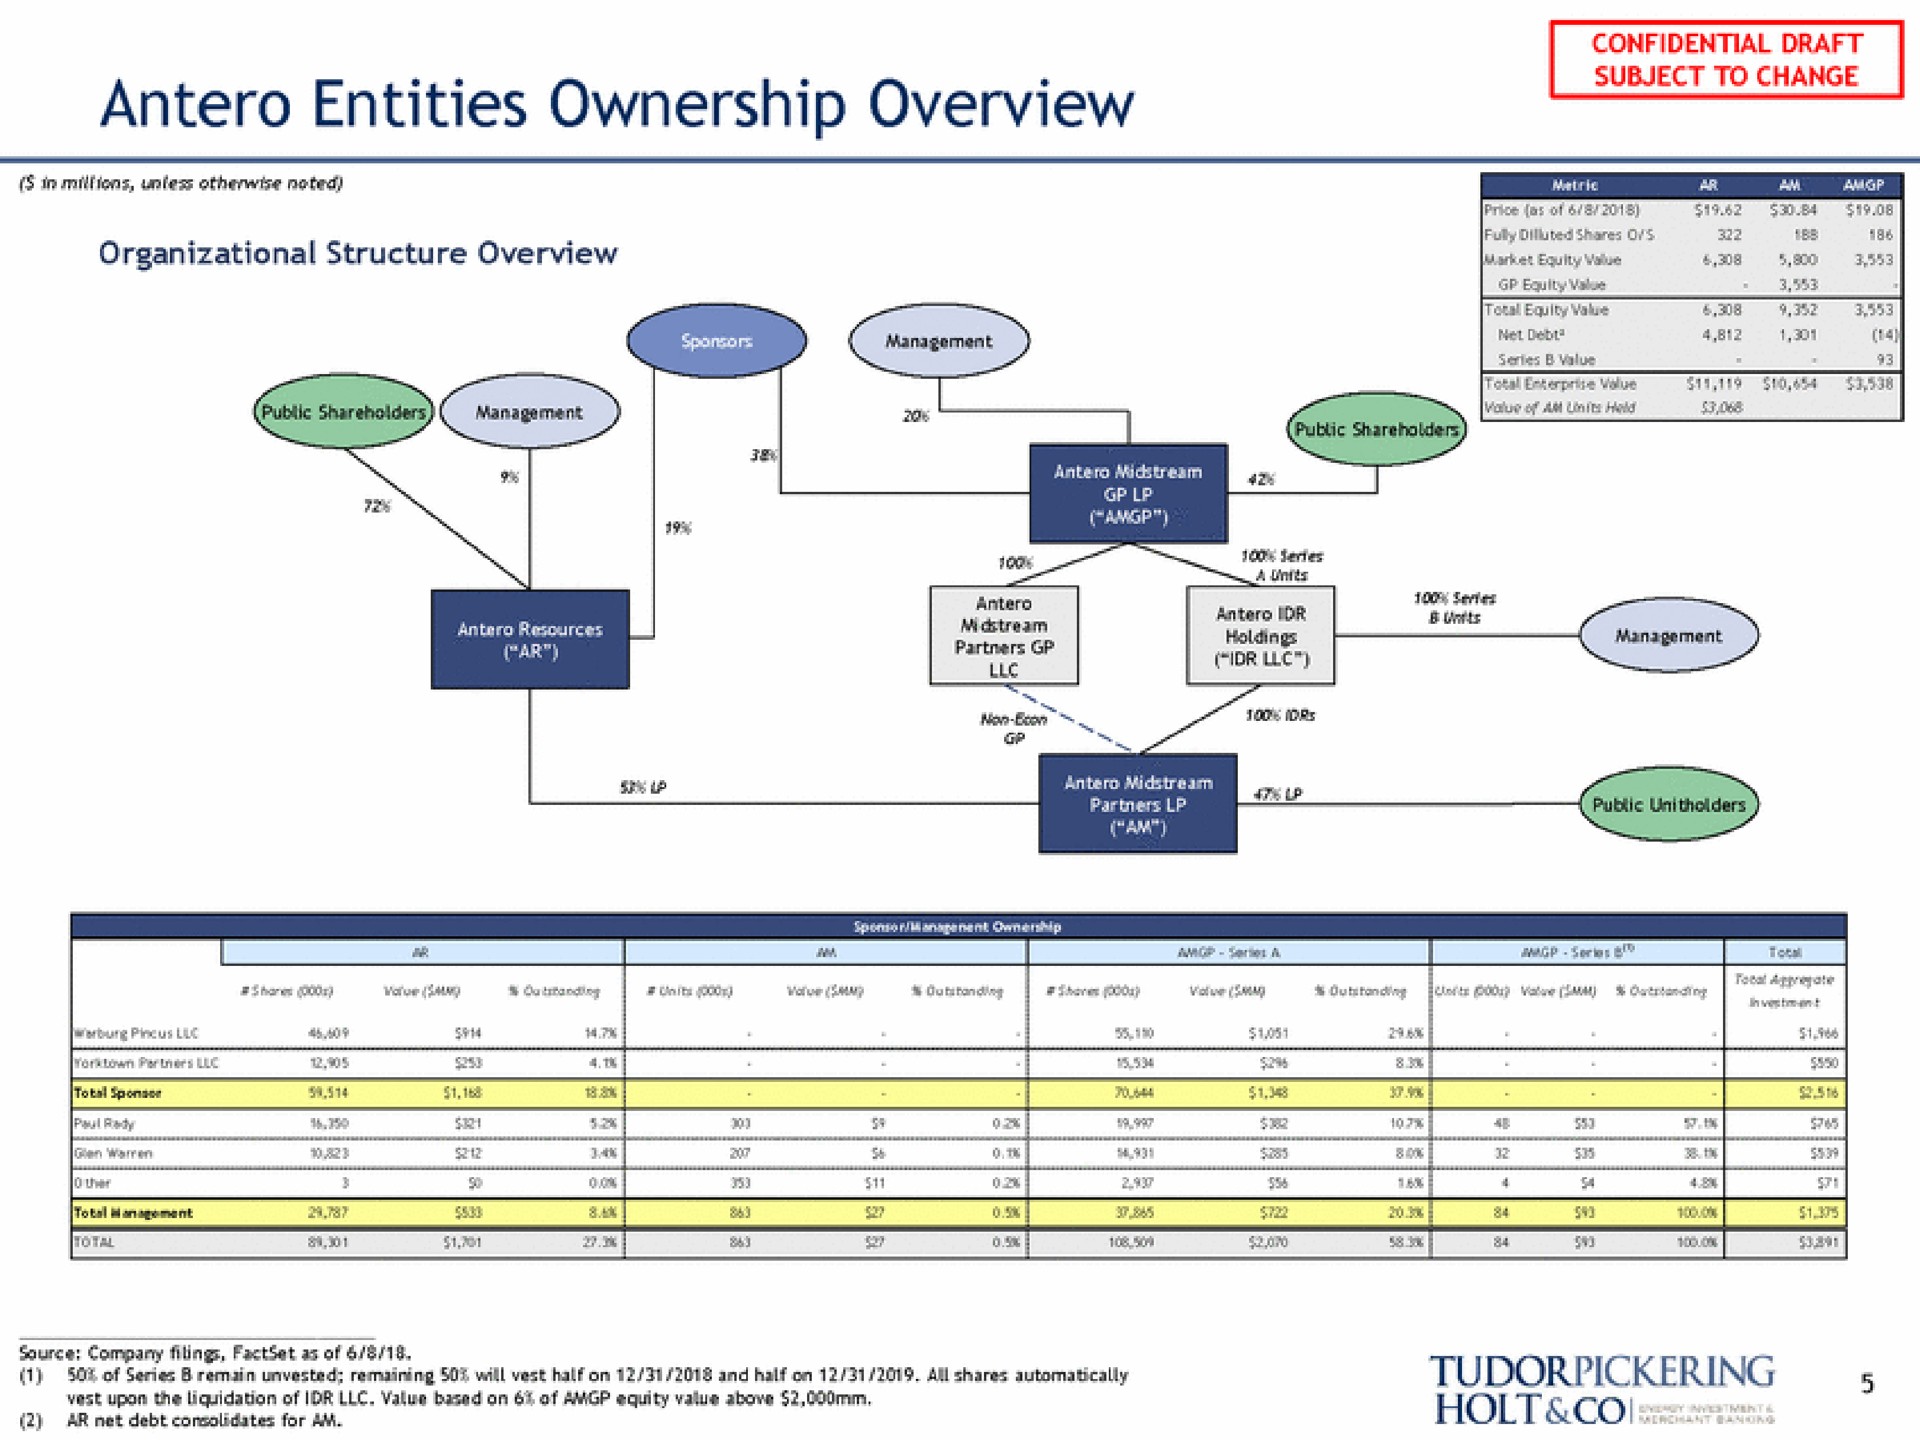 entities ownership overview tee | Tudor, Pickering, Holt & Co